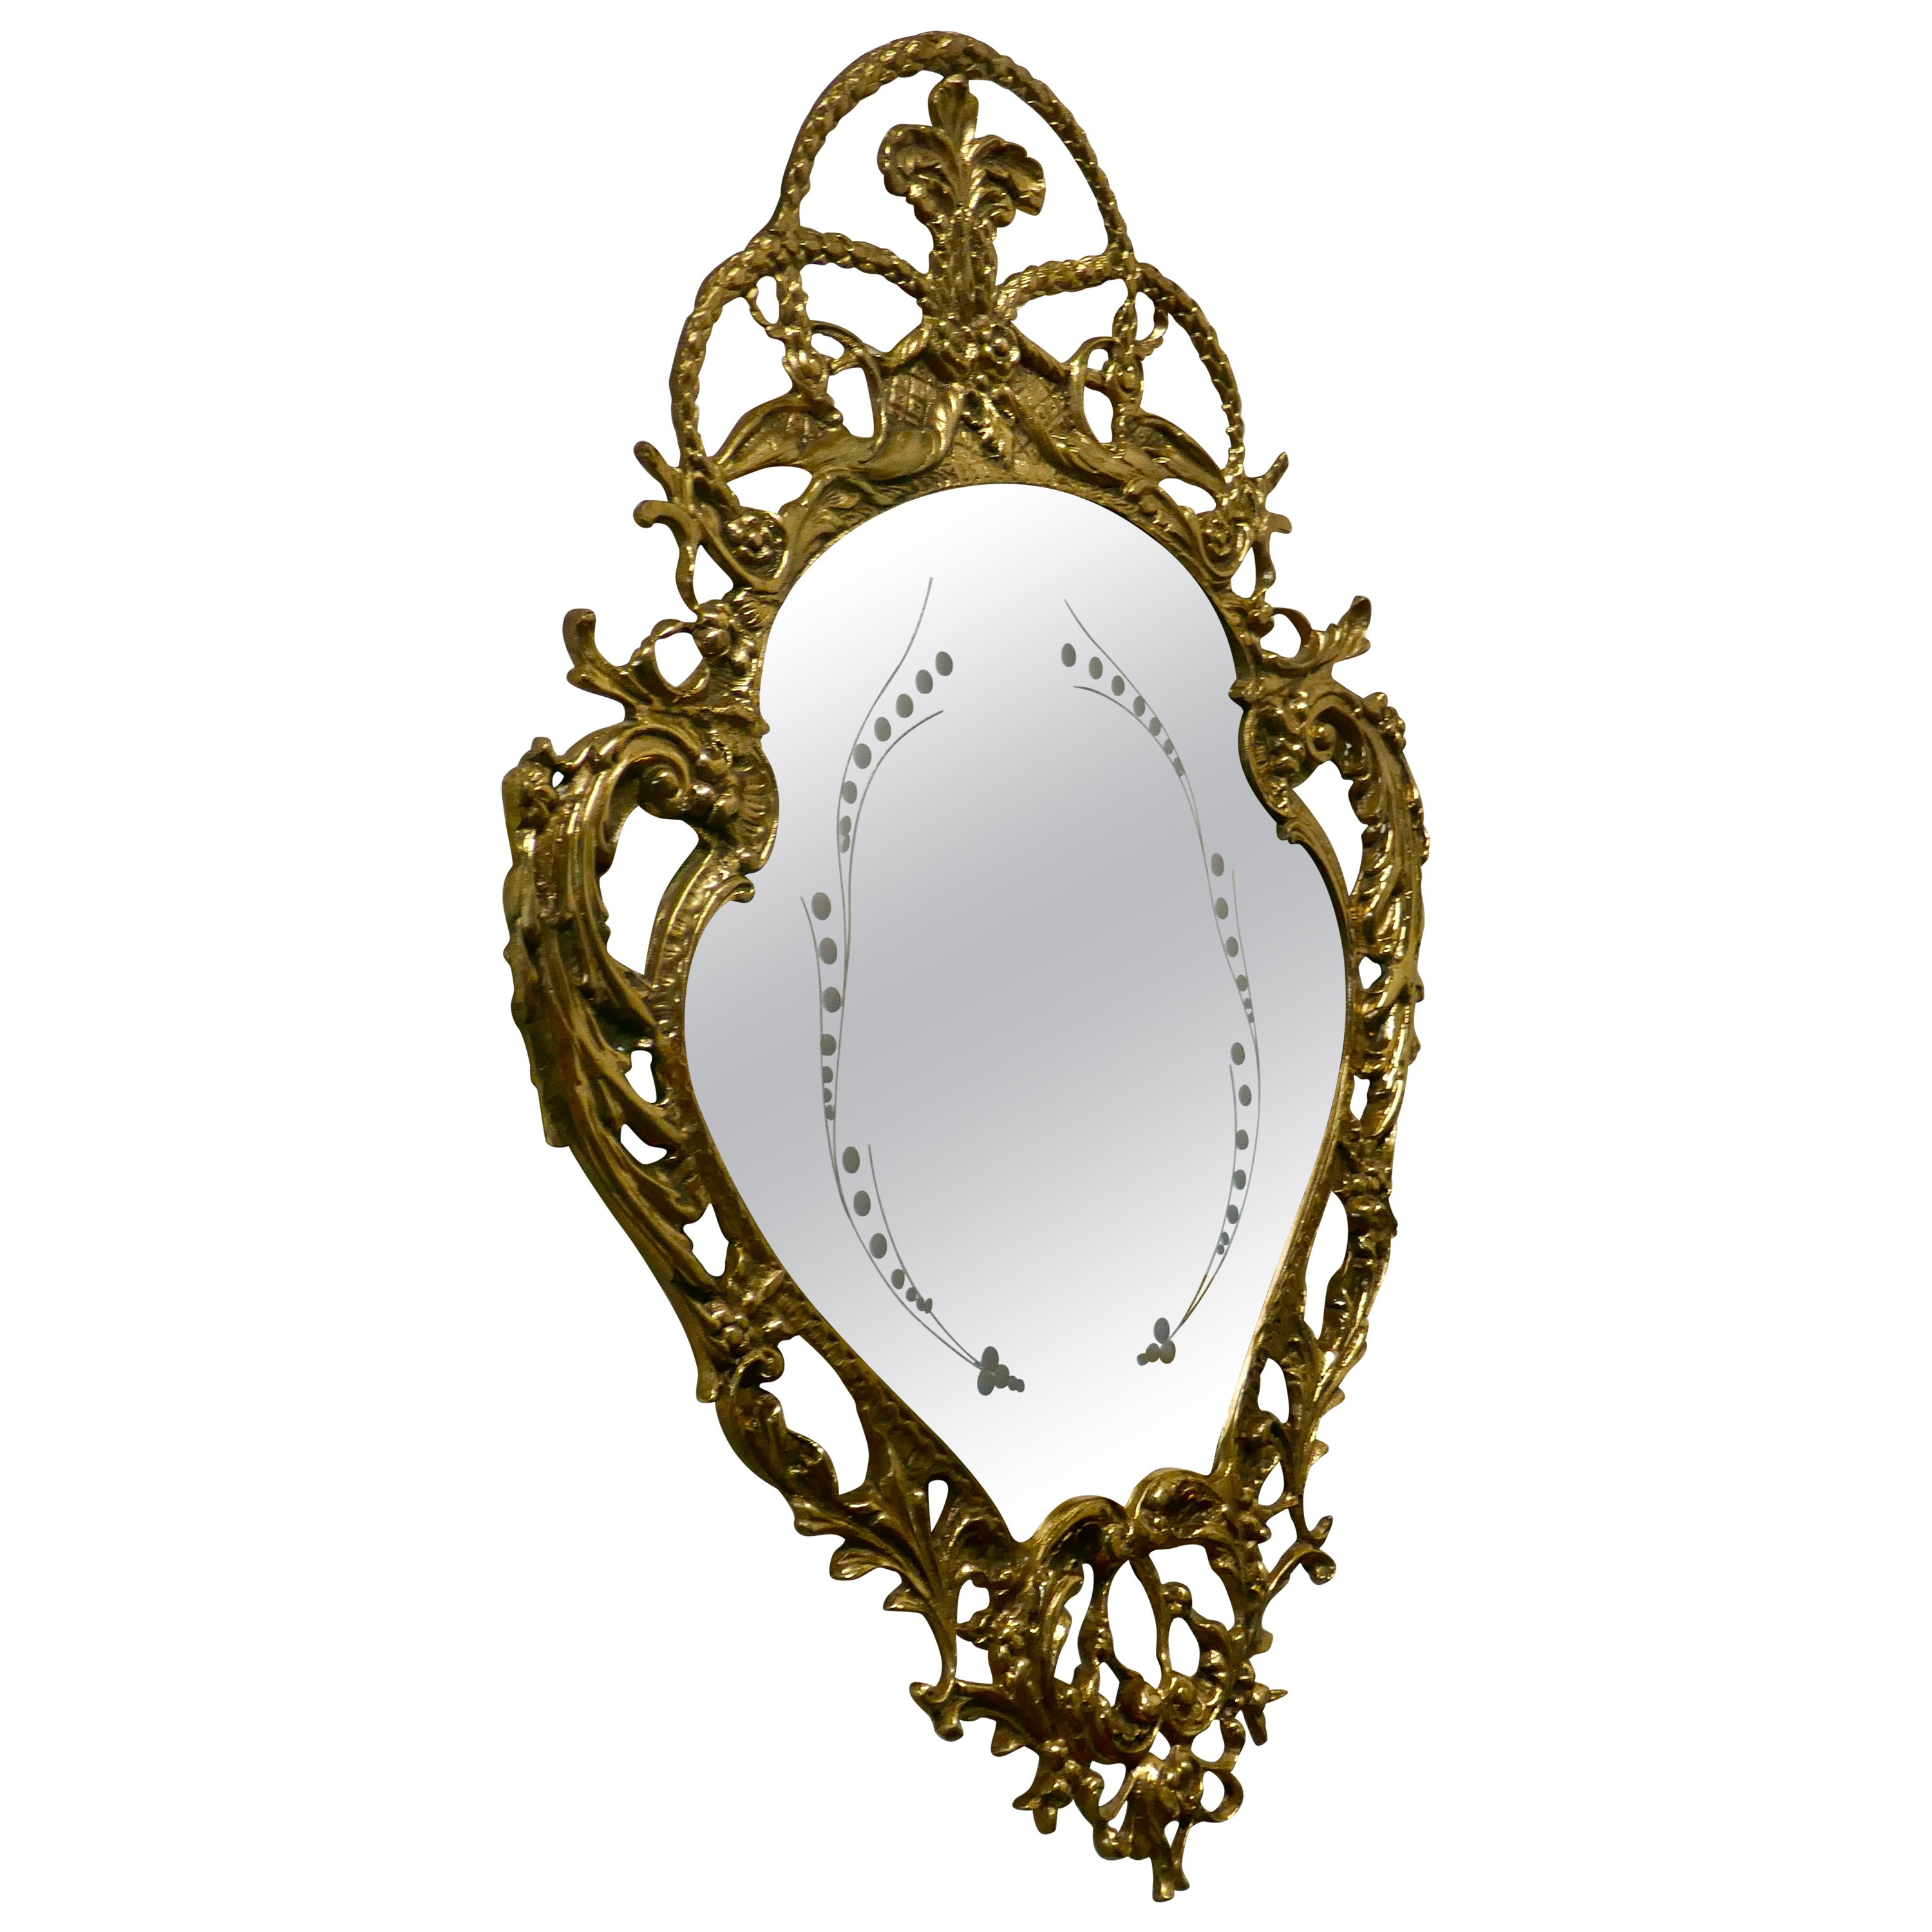 Unusual Brass Filigree Mirror with Etched Glass Pattern